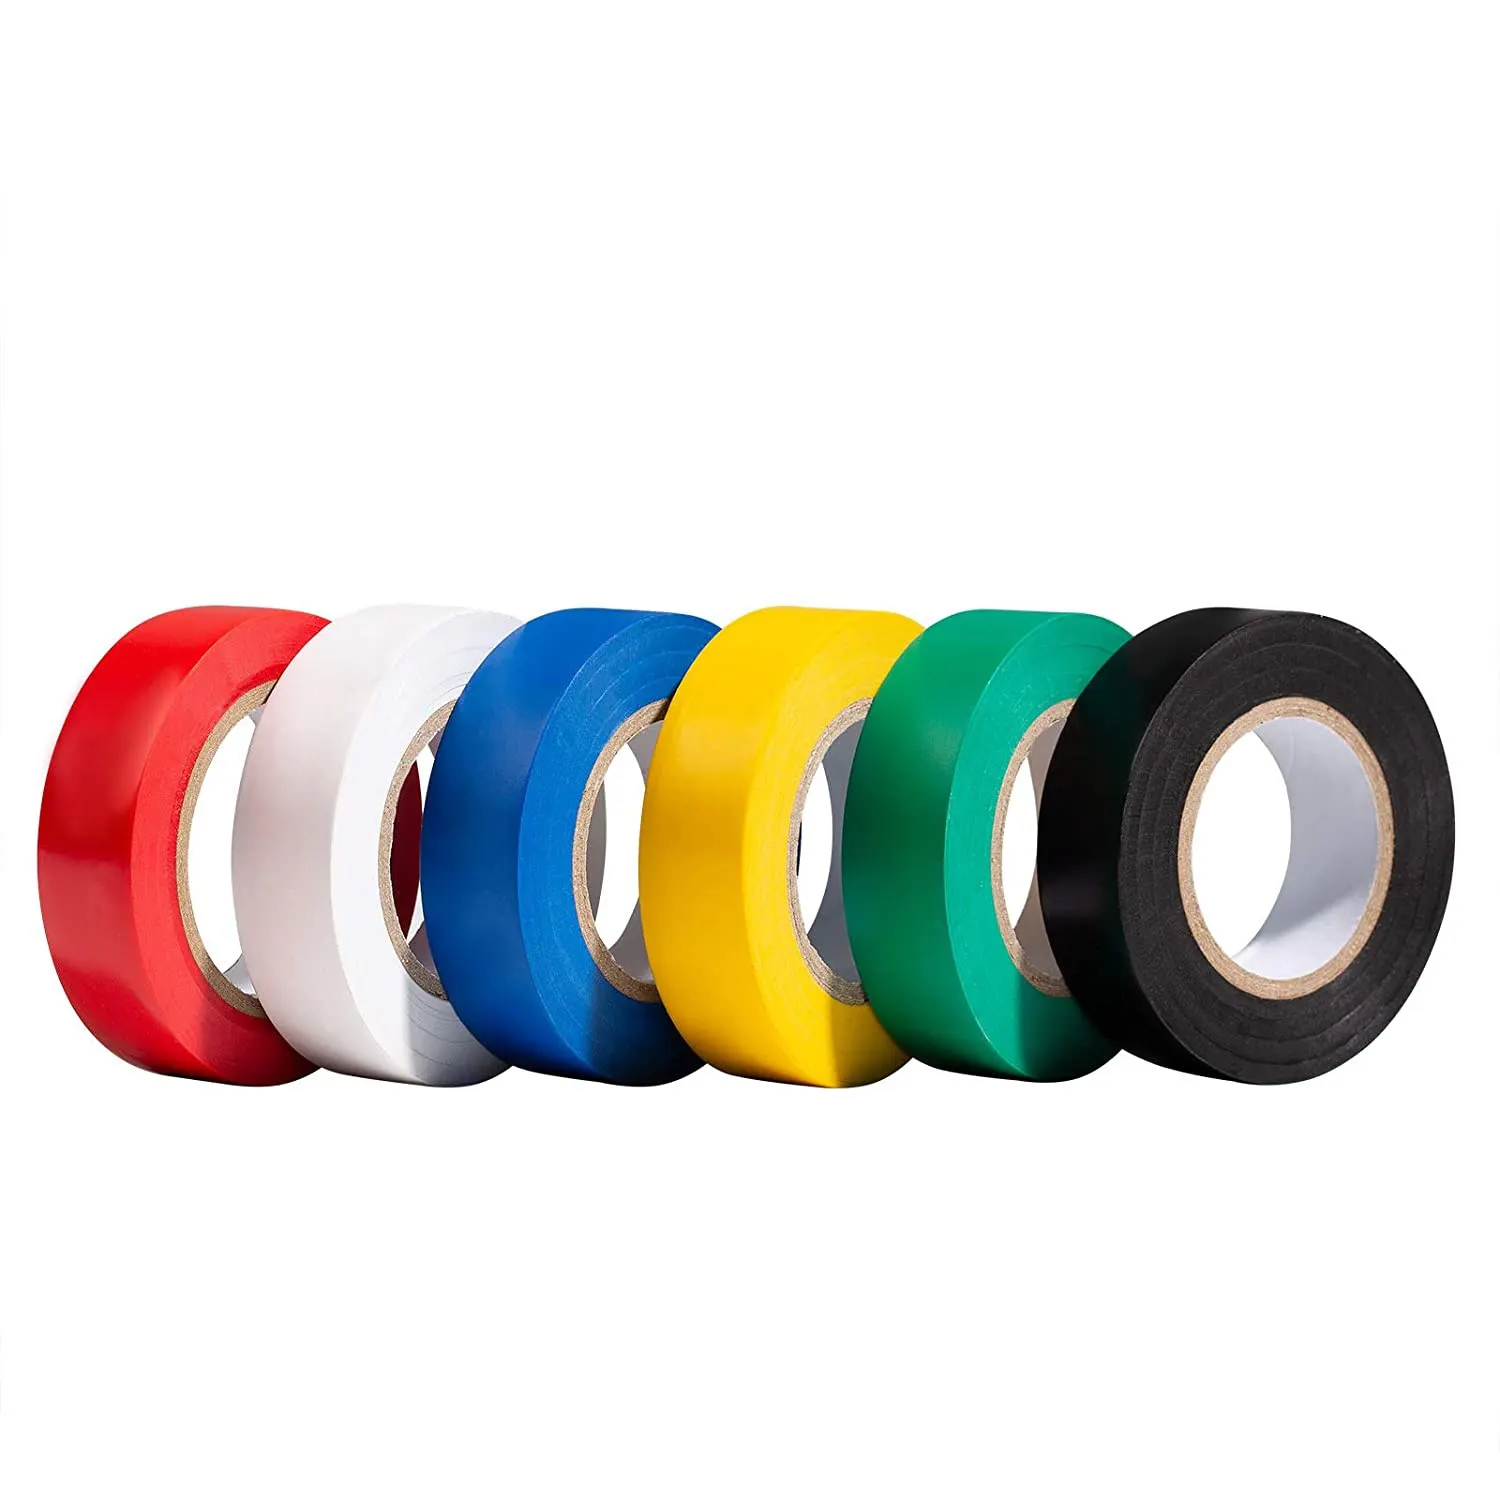 Custom Multi Colored Electrical Tape  Flame Retardant Strong Rubber Based Adhesive Pvc Electrical Wire Insulating Tape